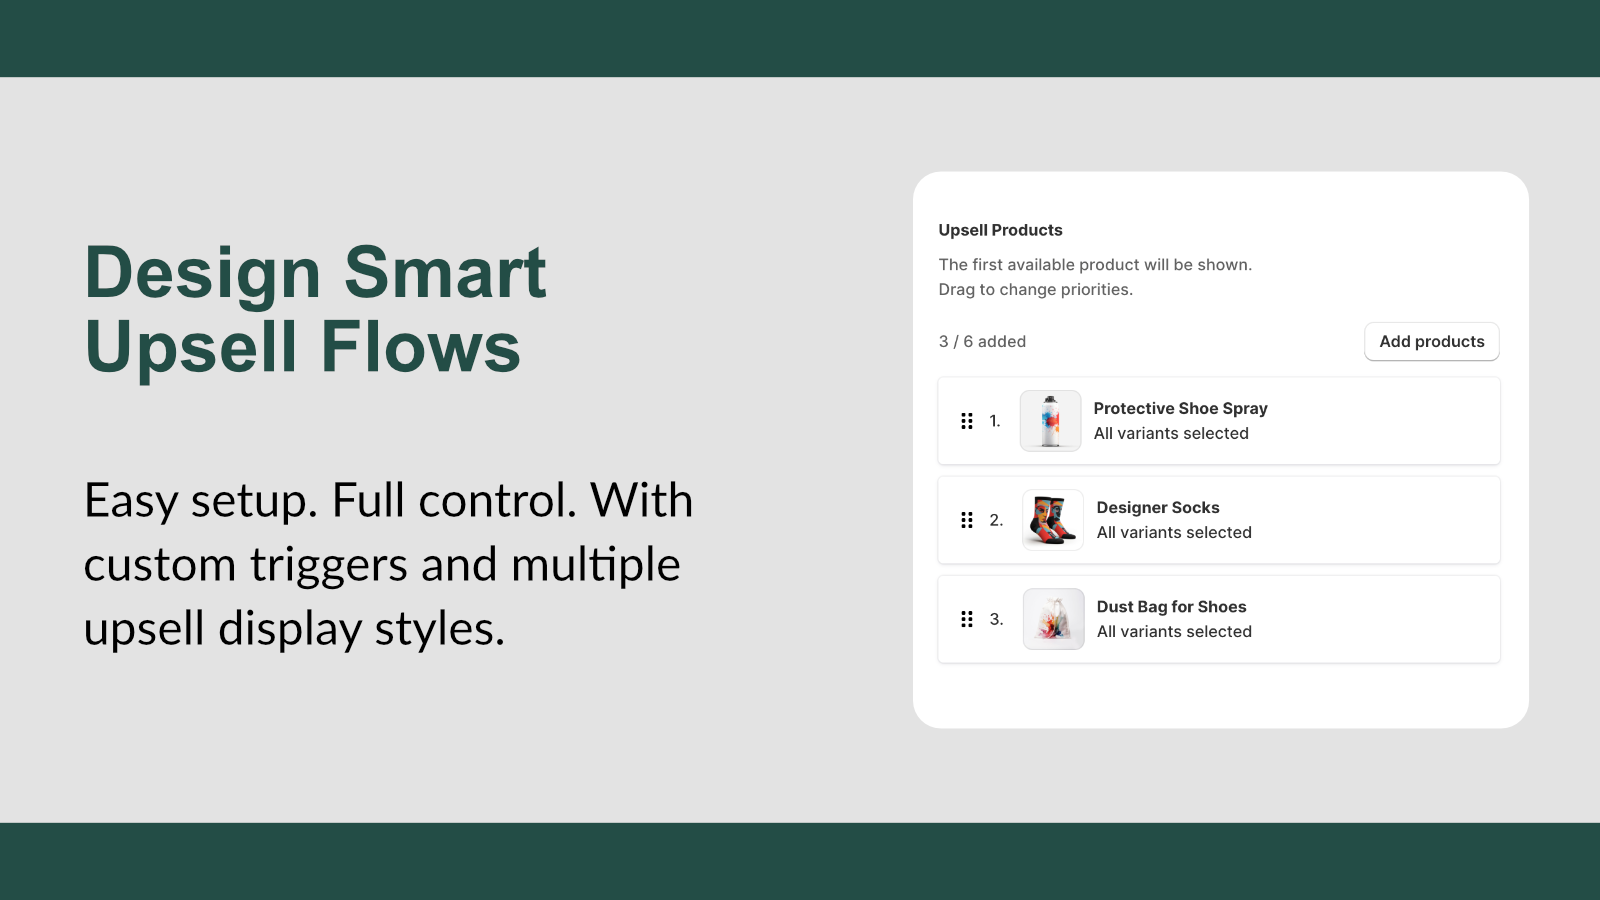 Design Smart Upsell Flows with triggers and display options.